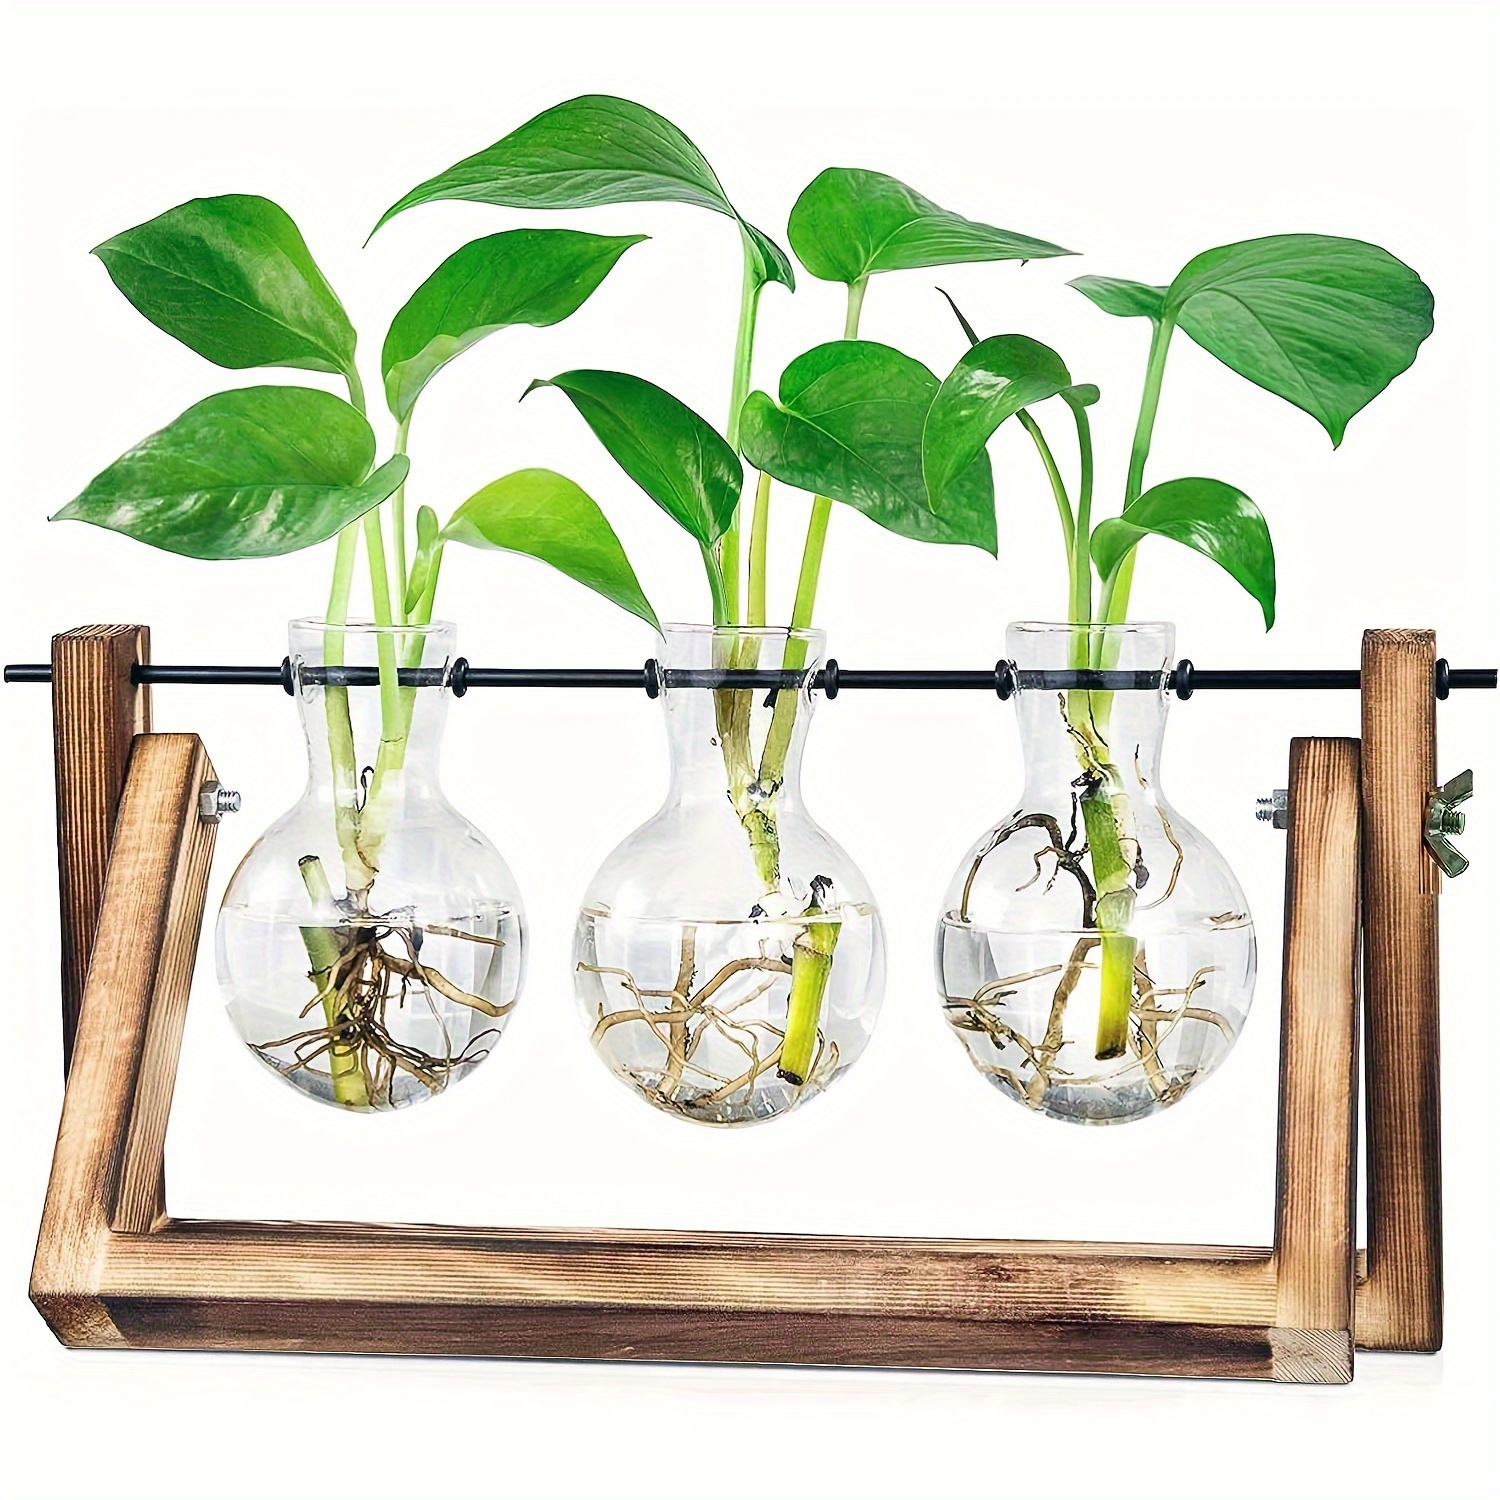 1pc desktop propagation station bulb plant terrarium with retro solid wooden stand and metal swivel holder for hydroponics plants home garden wedding decor